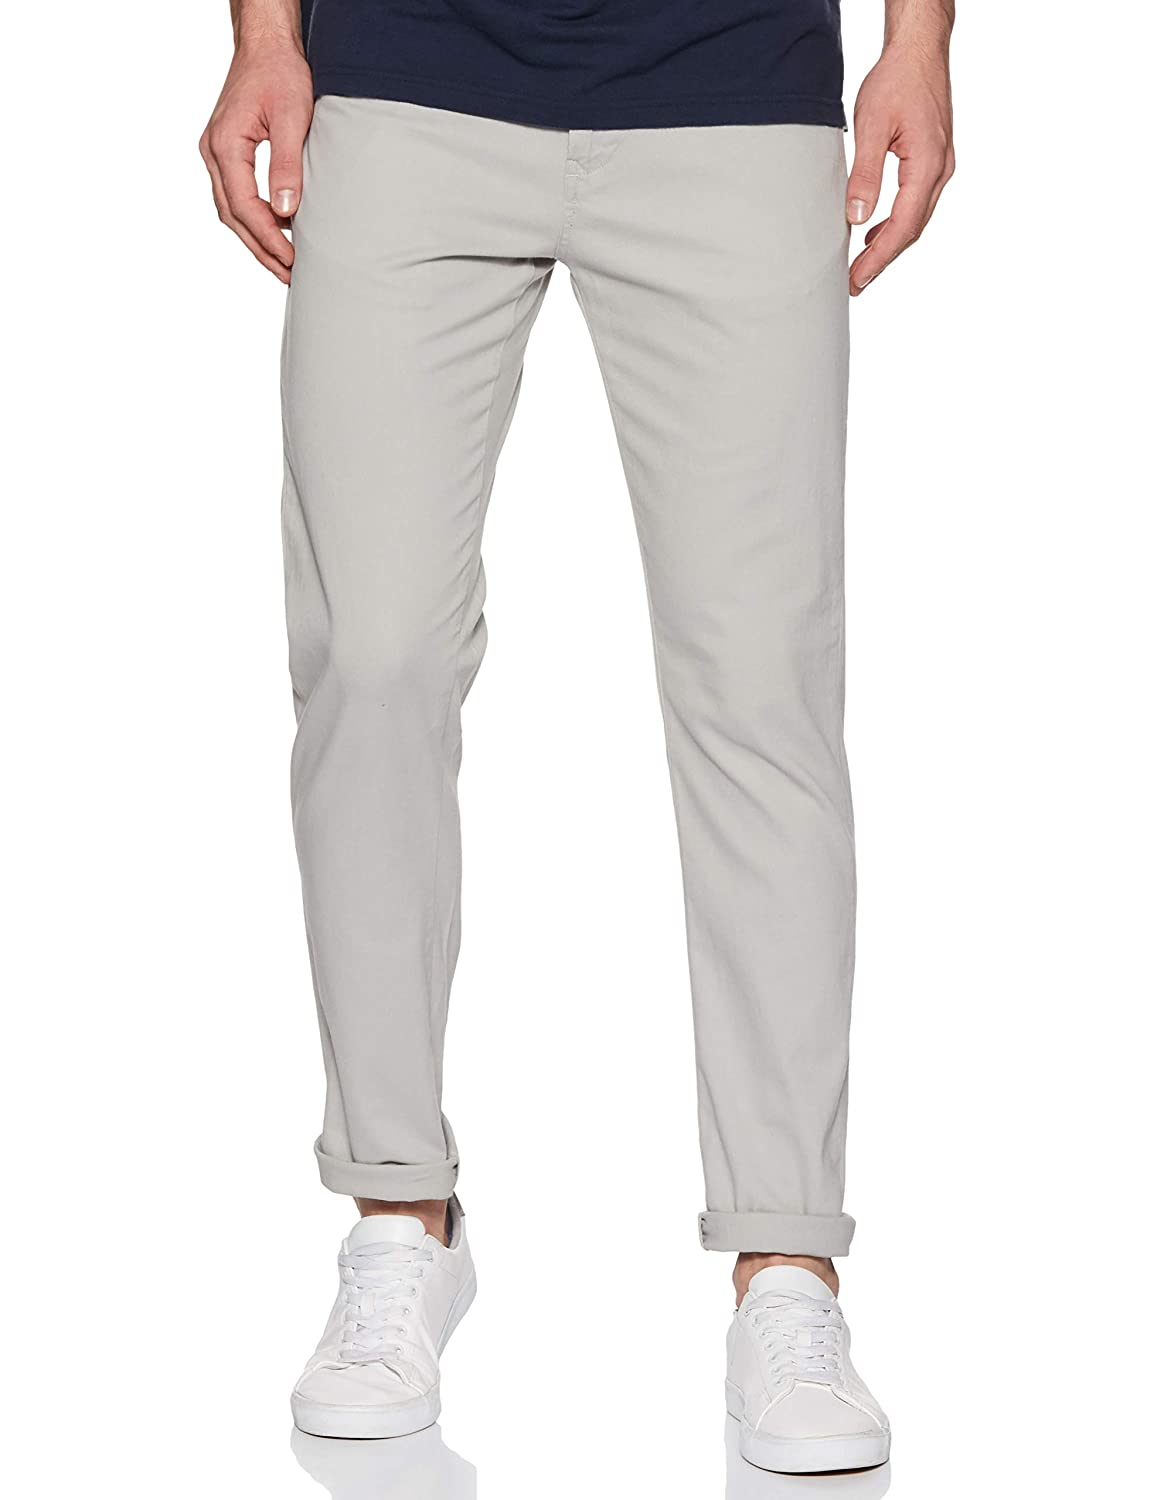 New Summer Ankle-Length Pants Men Cotton Straight Fit Fashion Thin Brand  Clothing Solid Color Casual Trousers Male 28-38 Size: 33, Color: Light gray  | Uquid shopping cart: Online shopping with crypto currencies